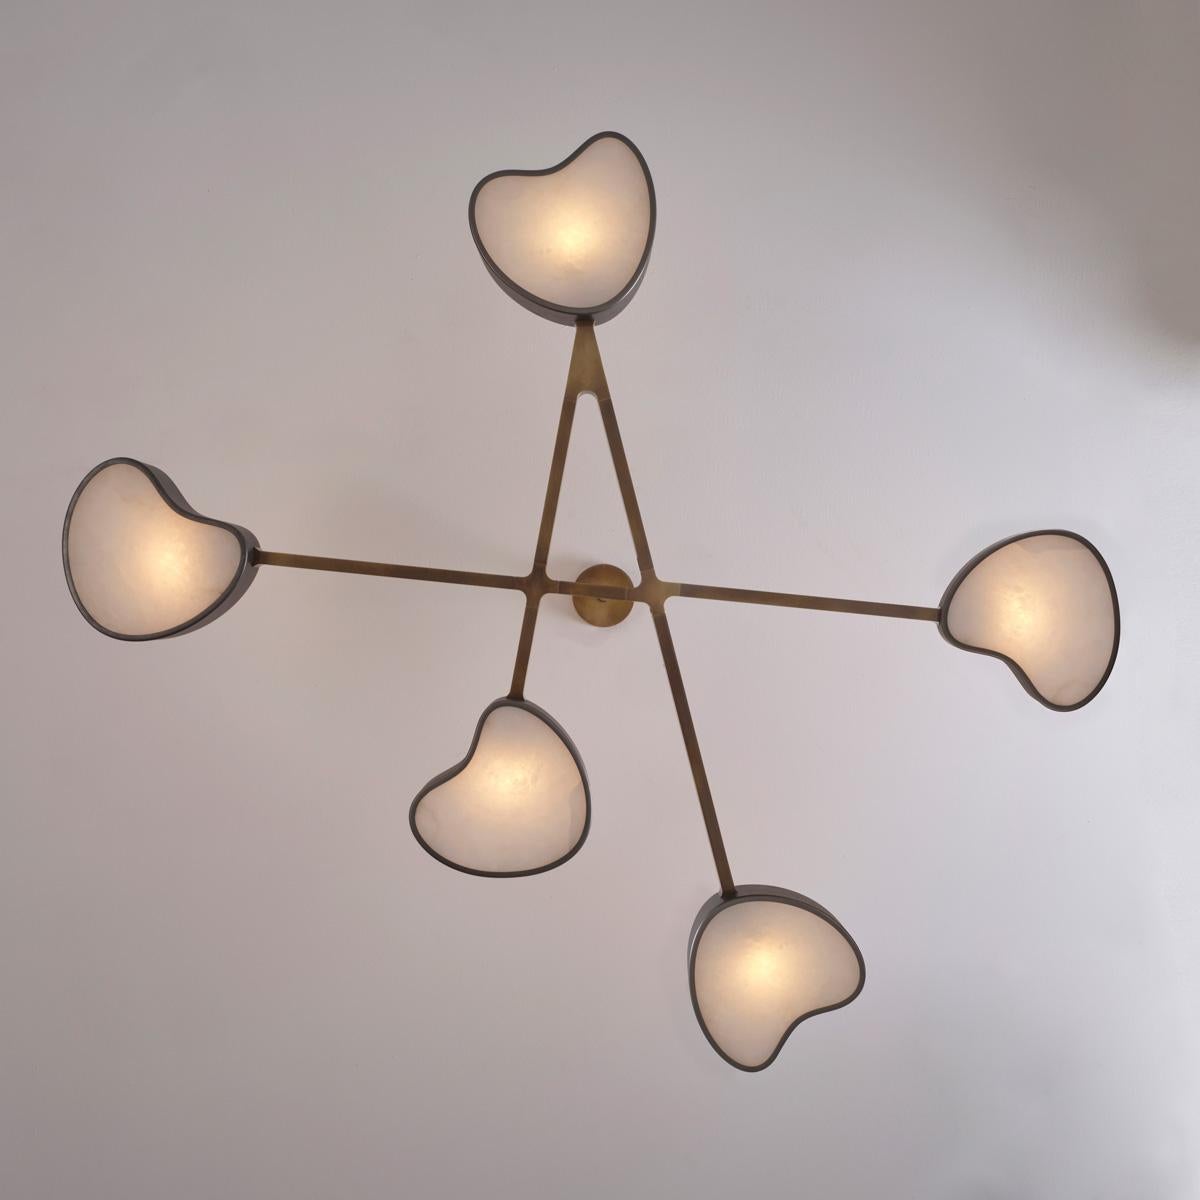 Cuore N.5 Ceiling Light by Gaspare Asaro. Peltro and Bronze Finish In New Condition For Sale In New York, NY